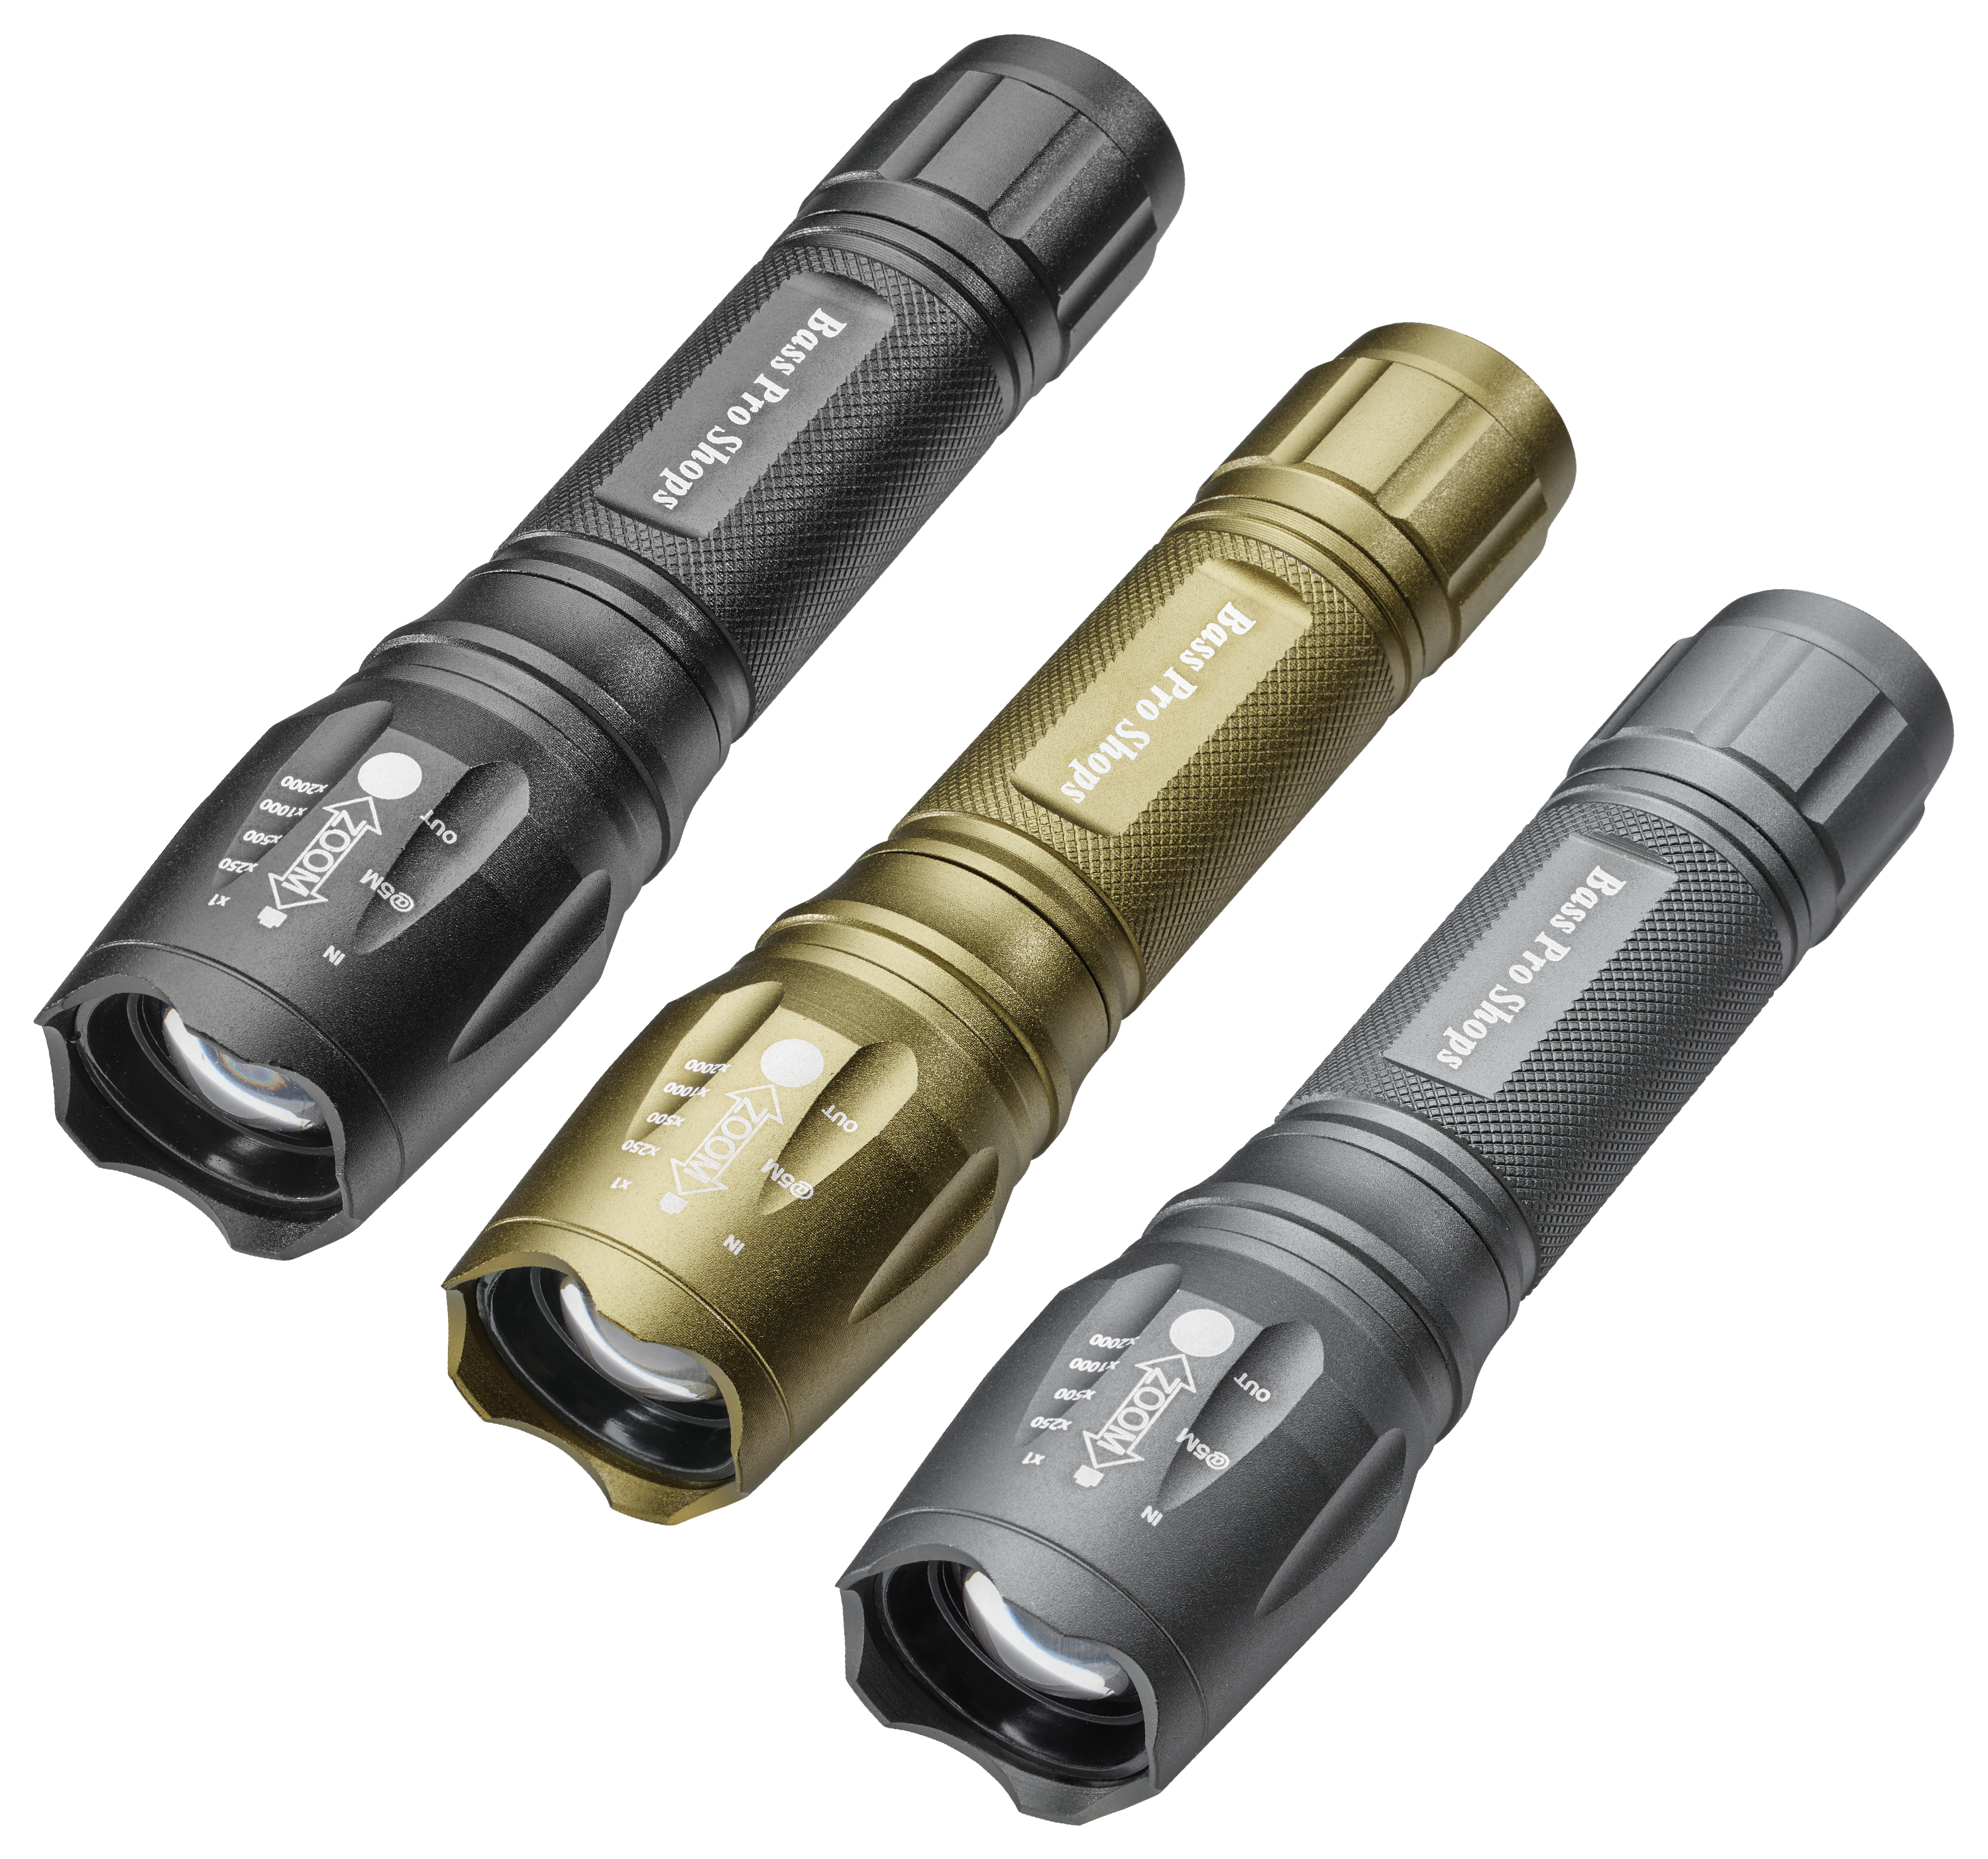 Bass Pro Shops 2 Pack LED Waterproof Survival Flashlights New!